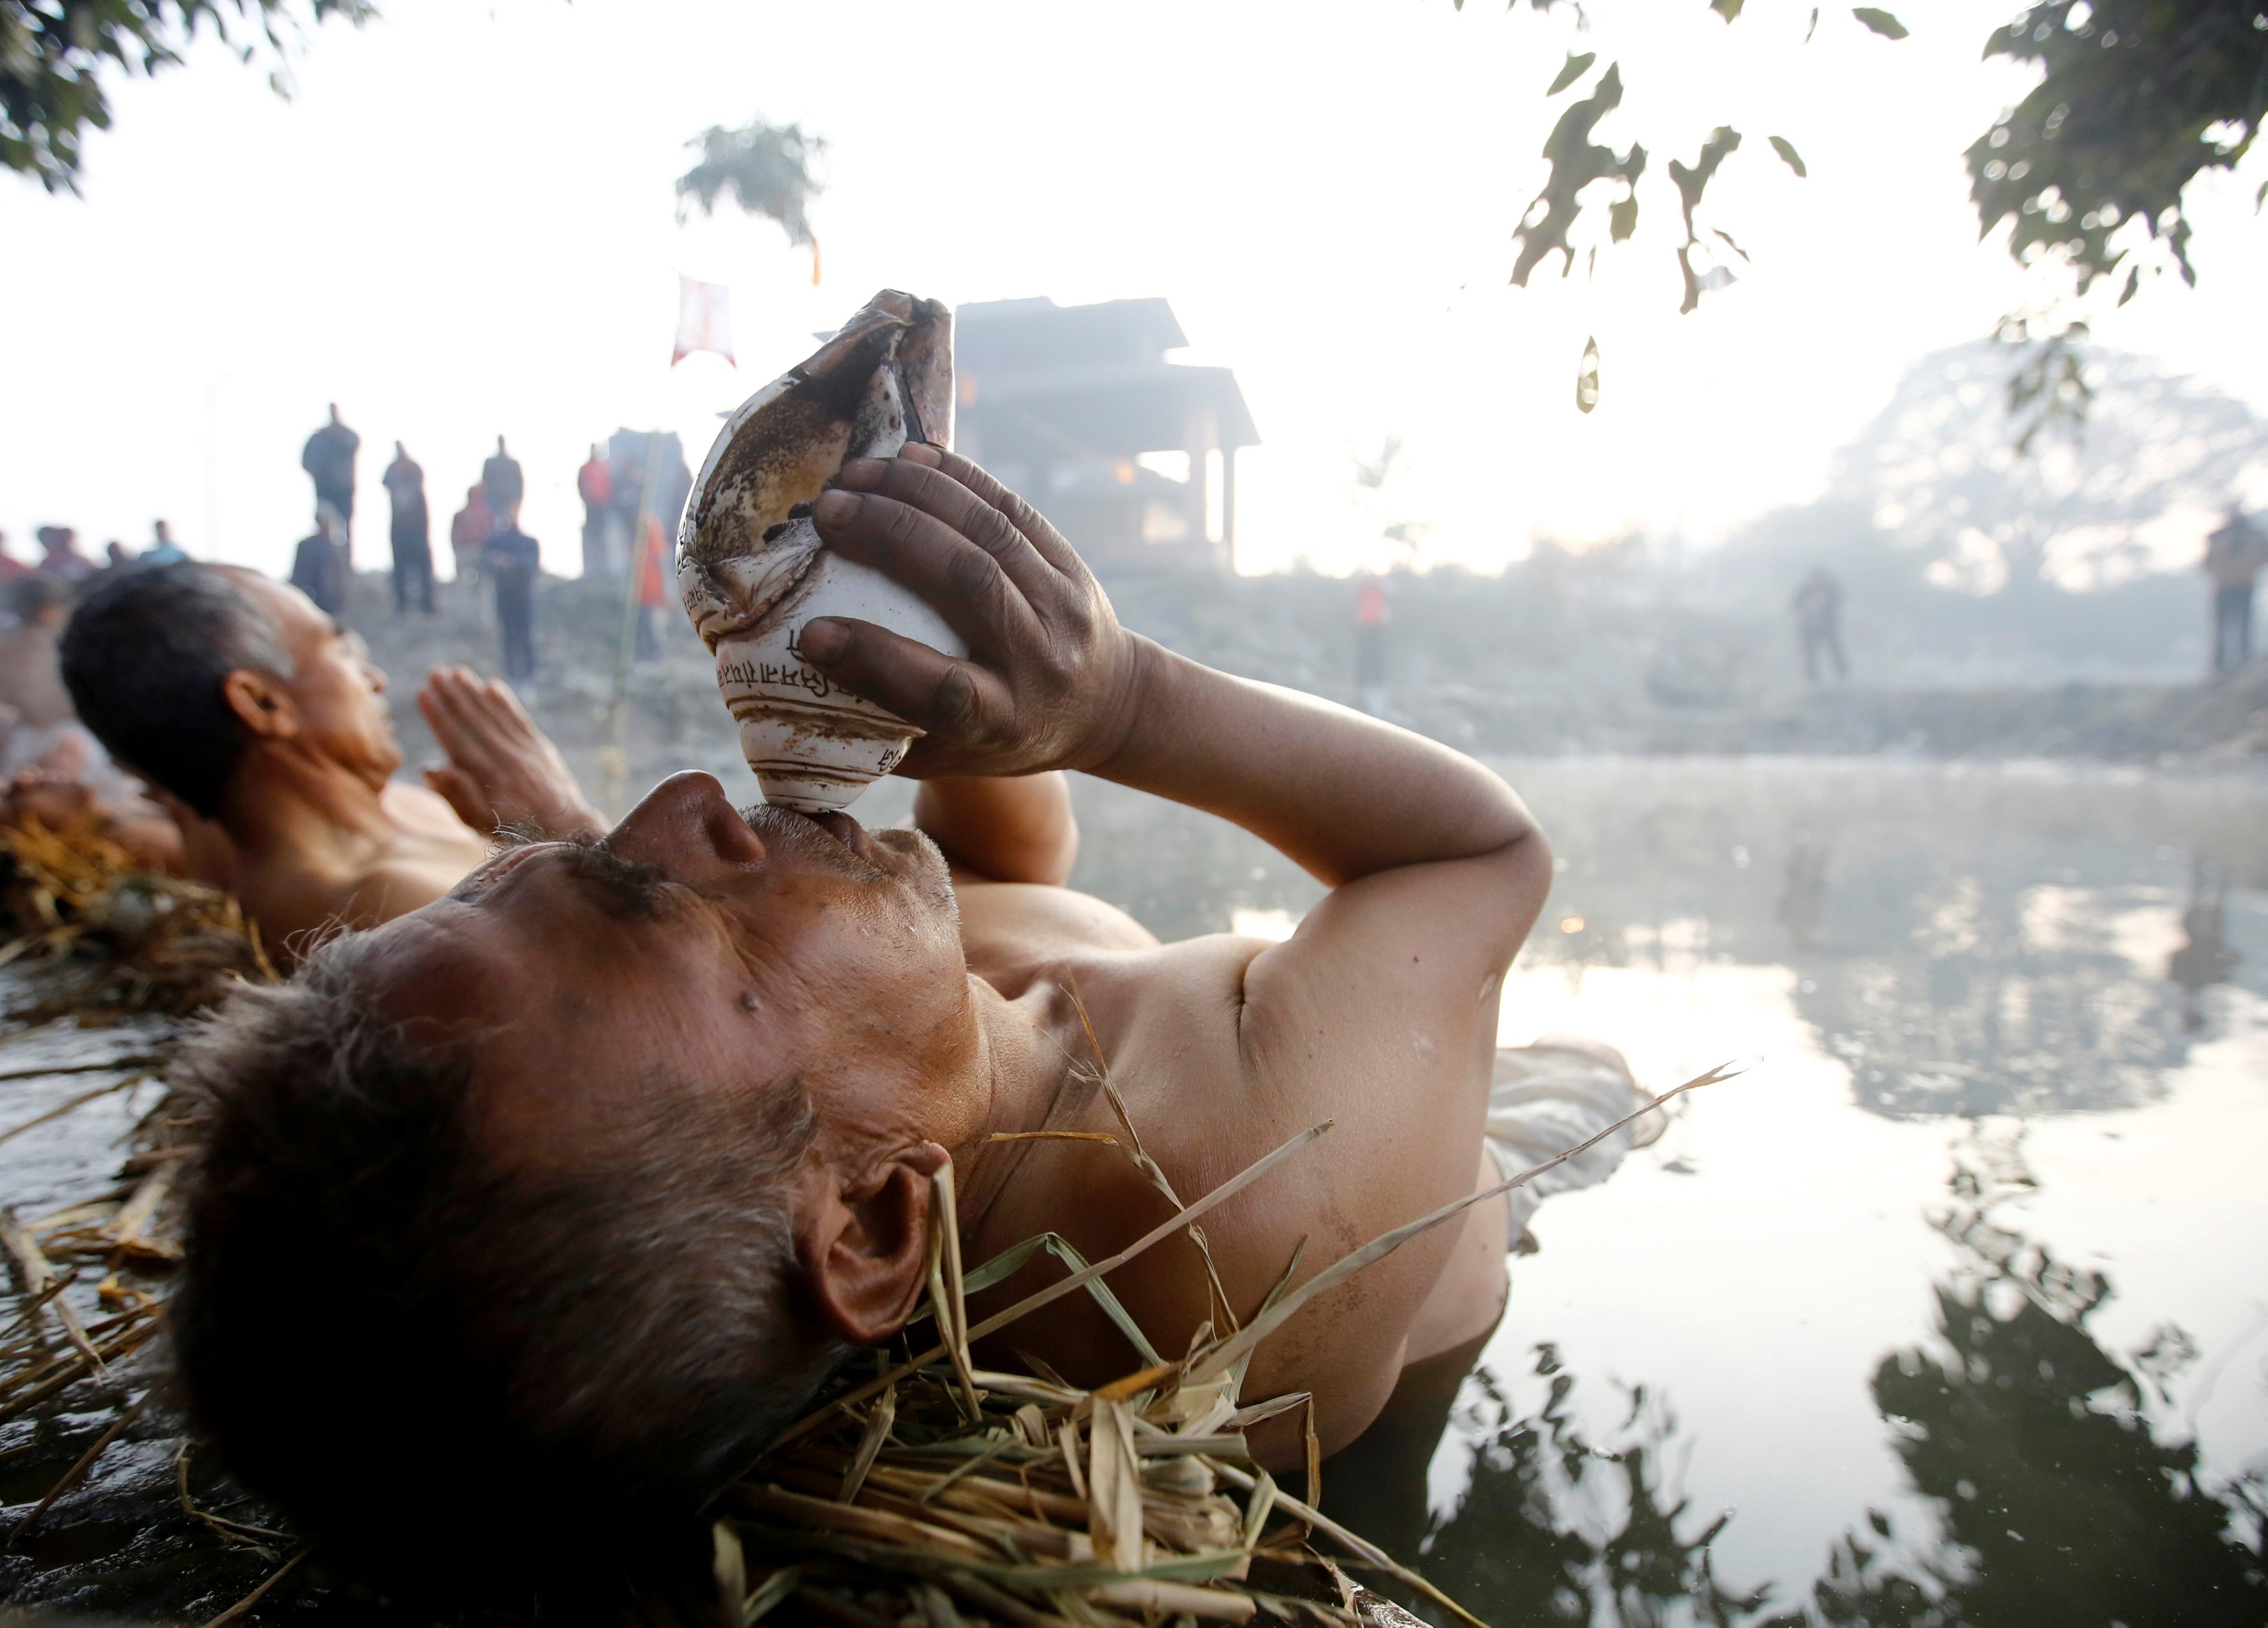 A devotee blows a conch as he offers prayer by submerging in the Hanumante River during the Swasthani Brata Katha festival in Bhaktapur, Nepal January 13, 2017. REUTERS/Navesh Chitrakar